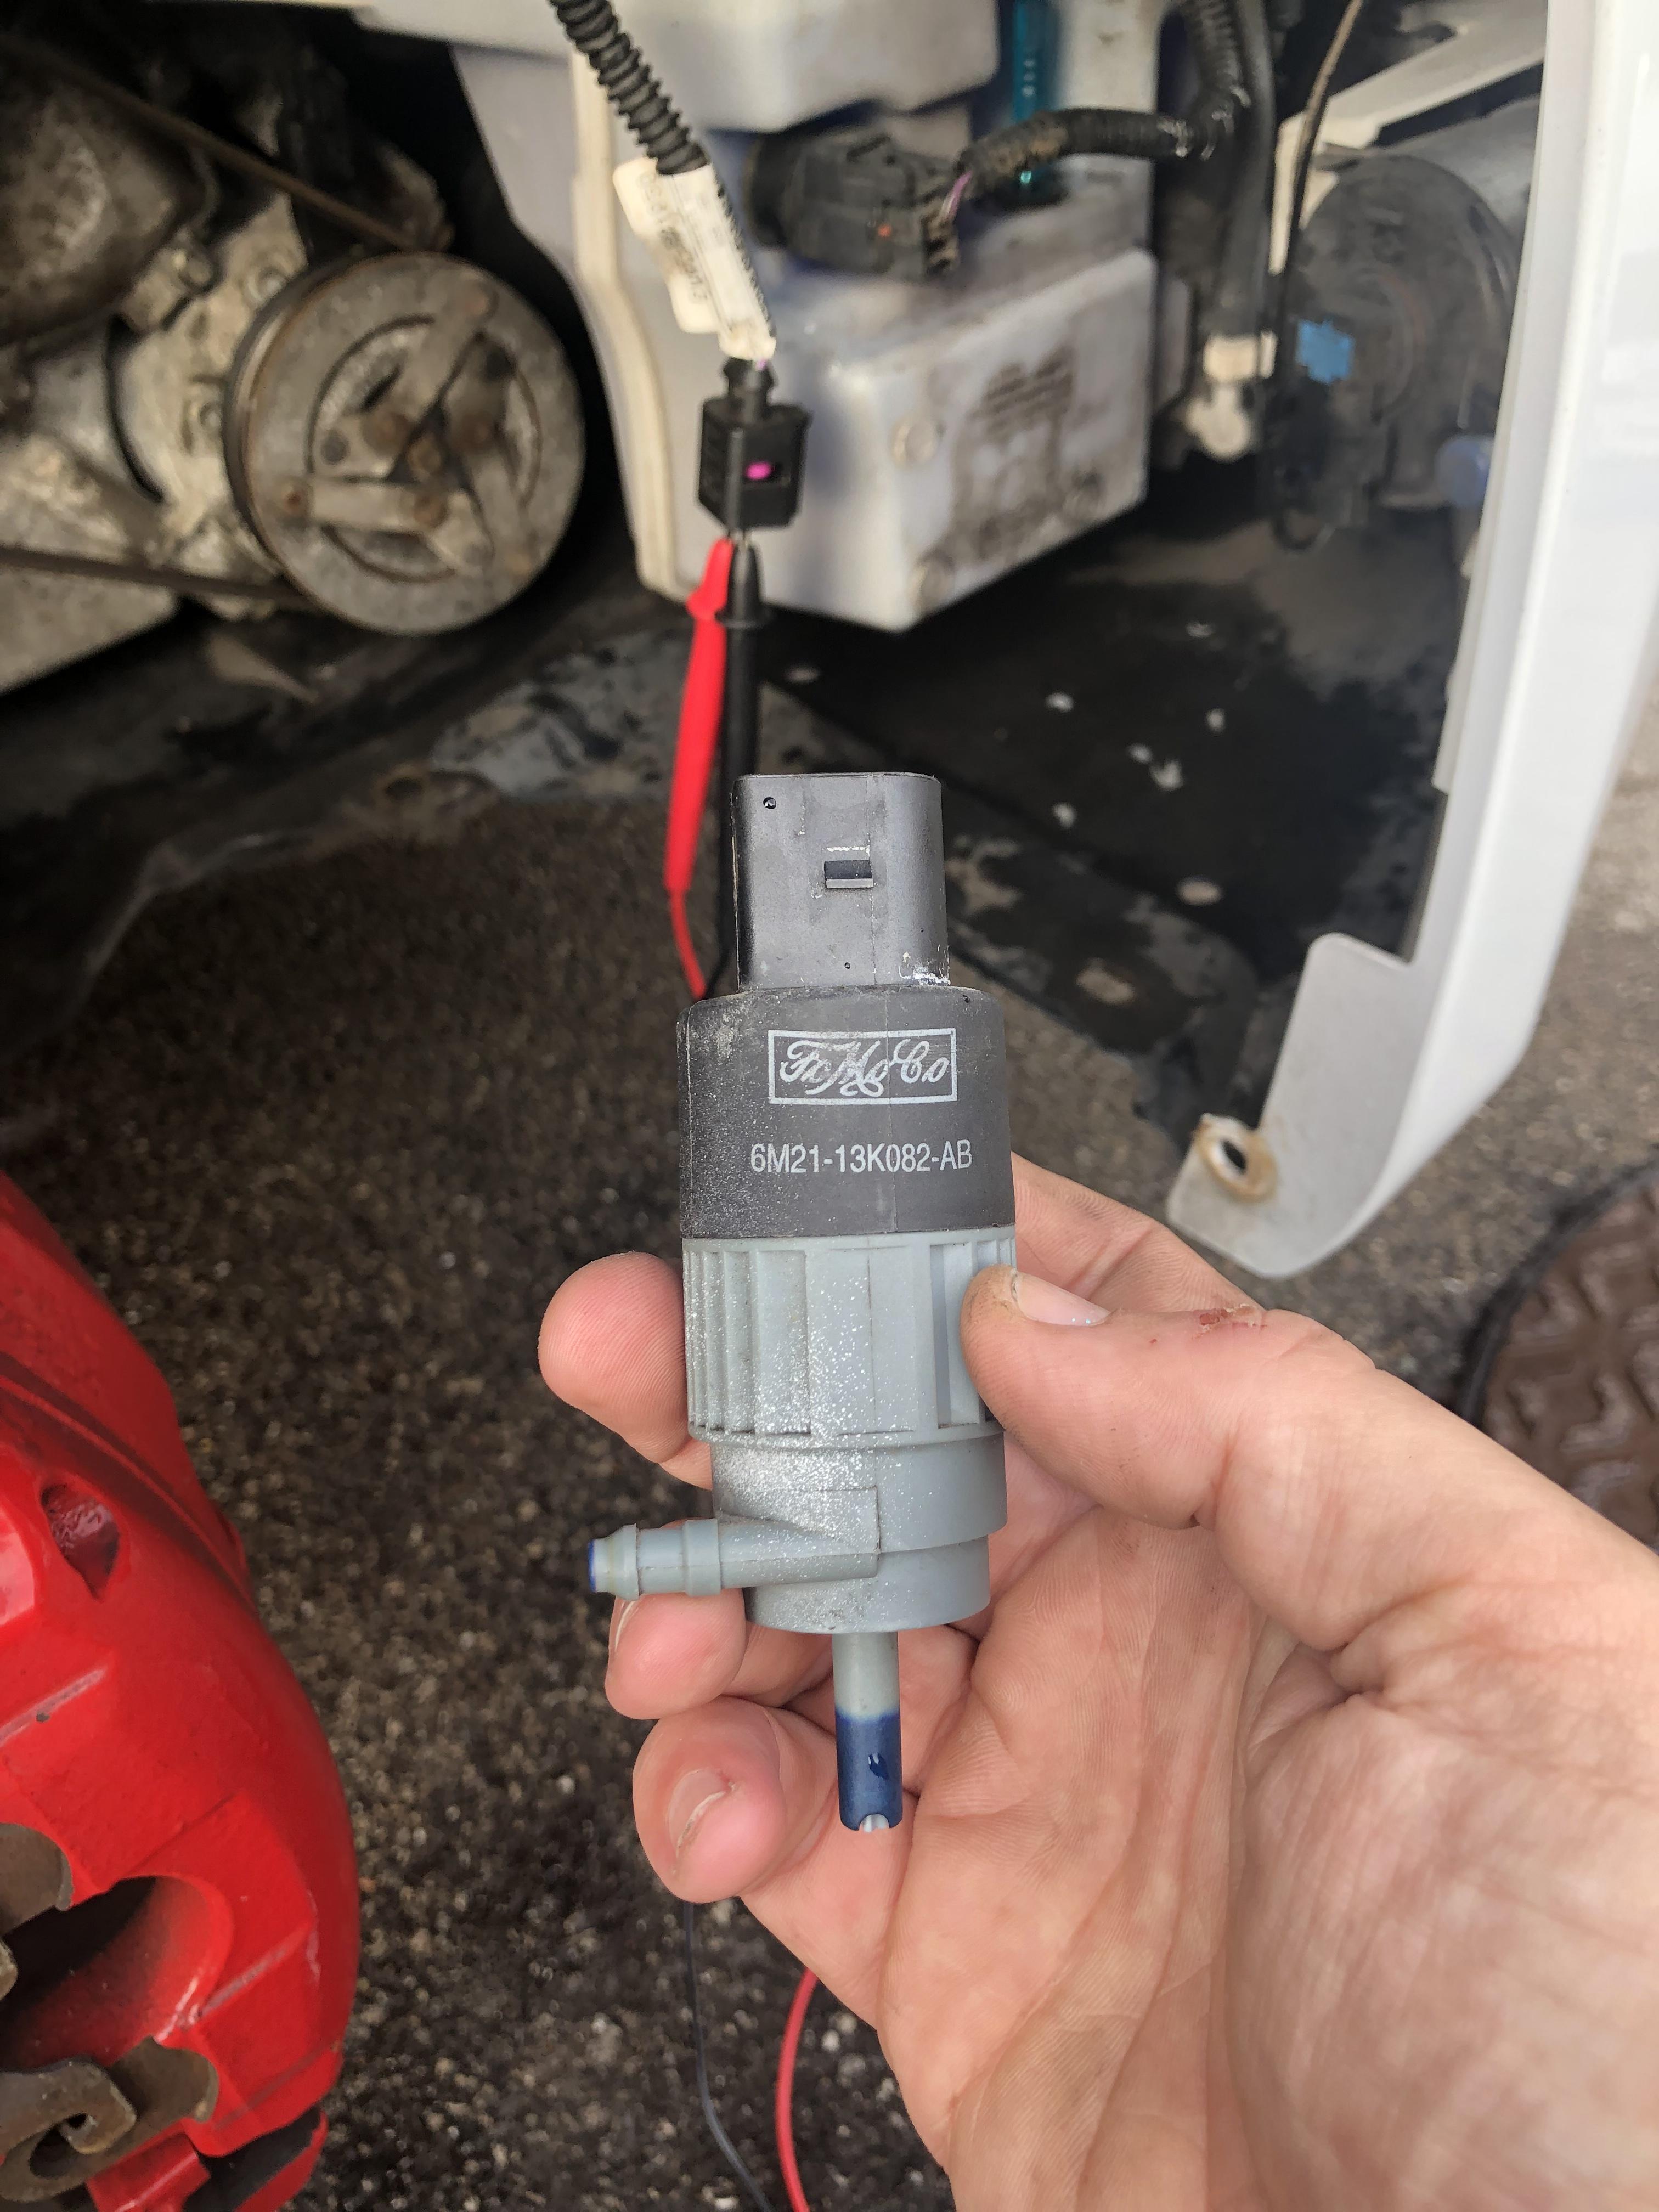 WINDSHIELD WASHER PUMP DOES NOT WORK FUSE LOCATION REPLACEMENT FORD FOCUS  MK3 2012-2018 